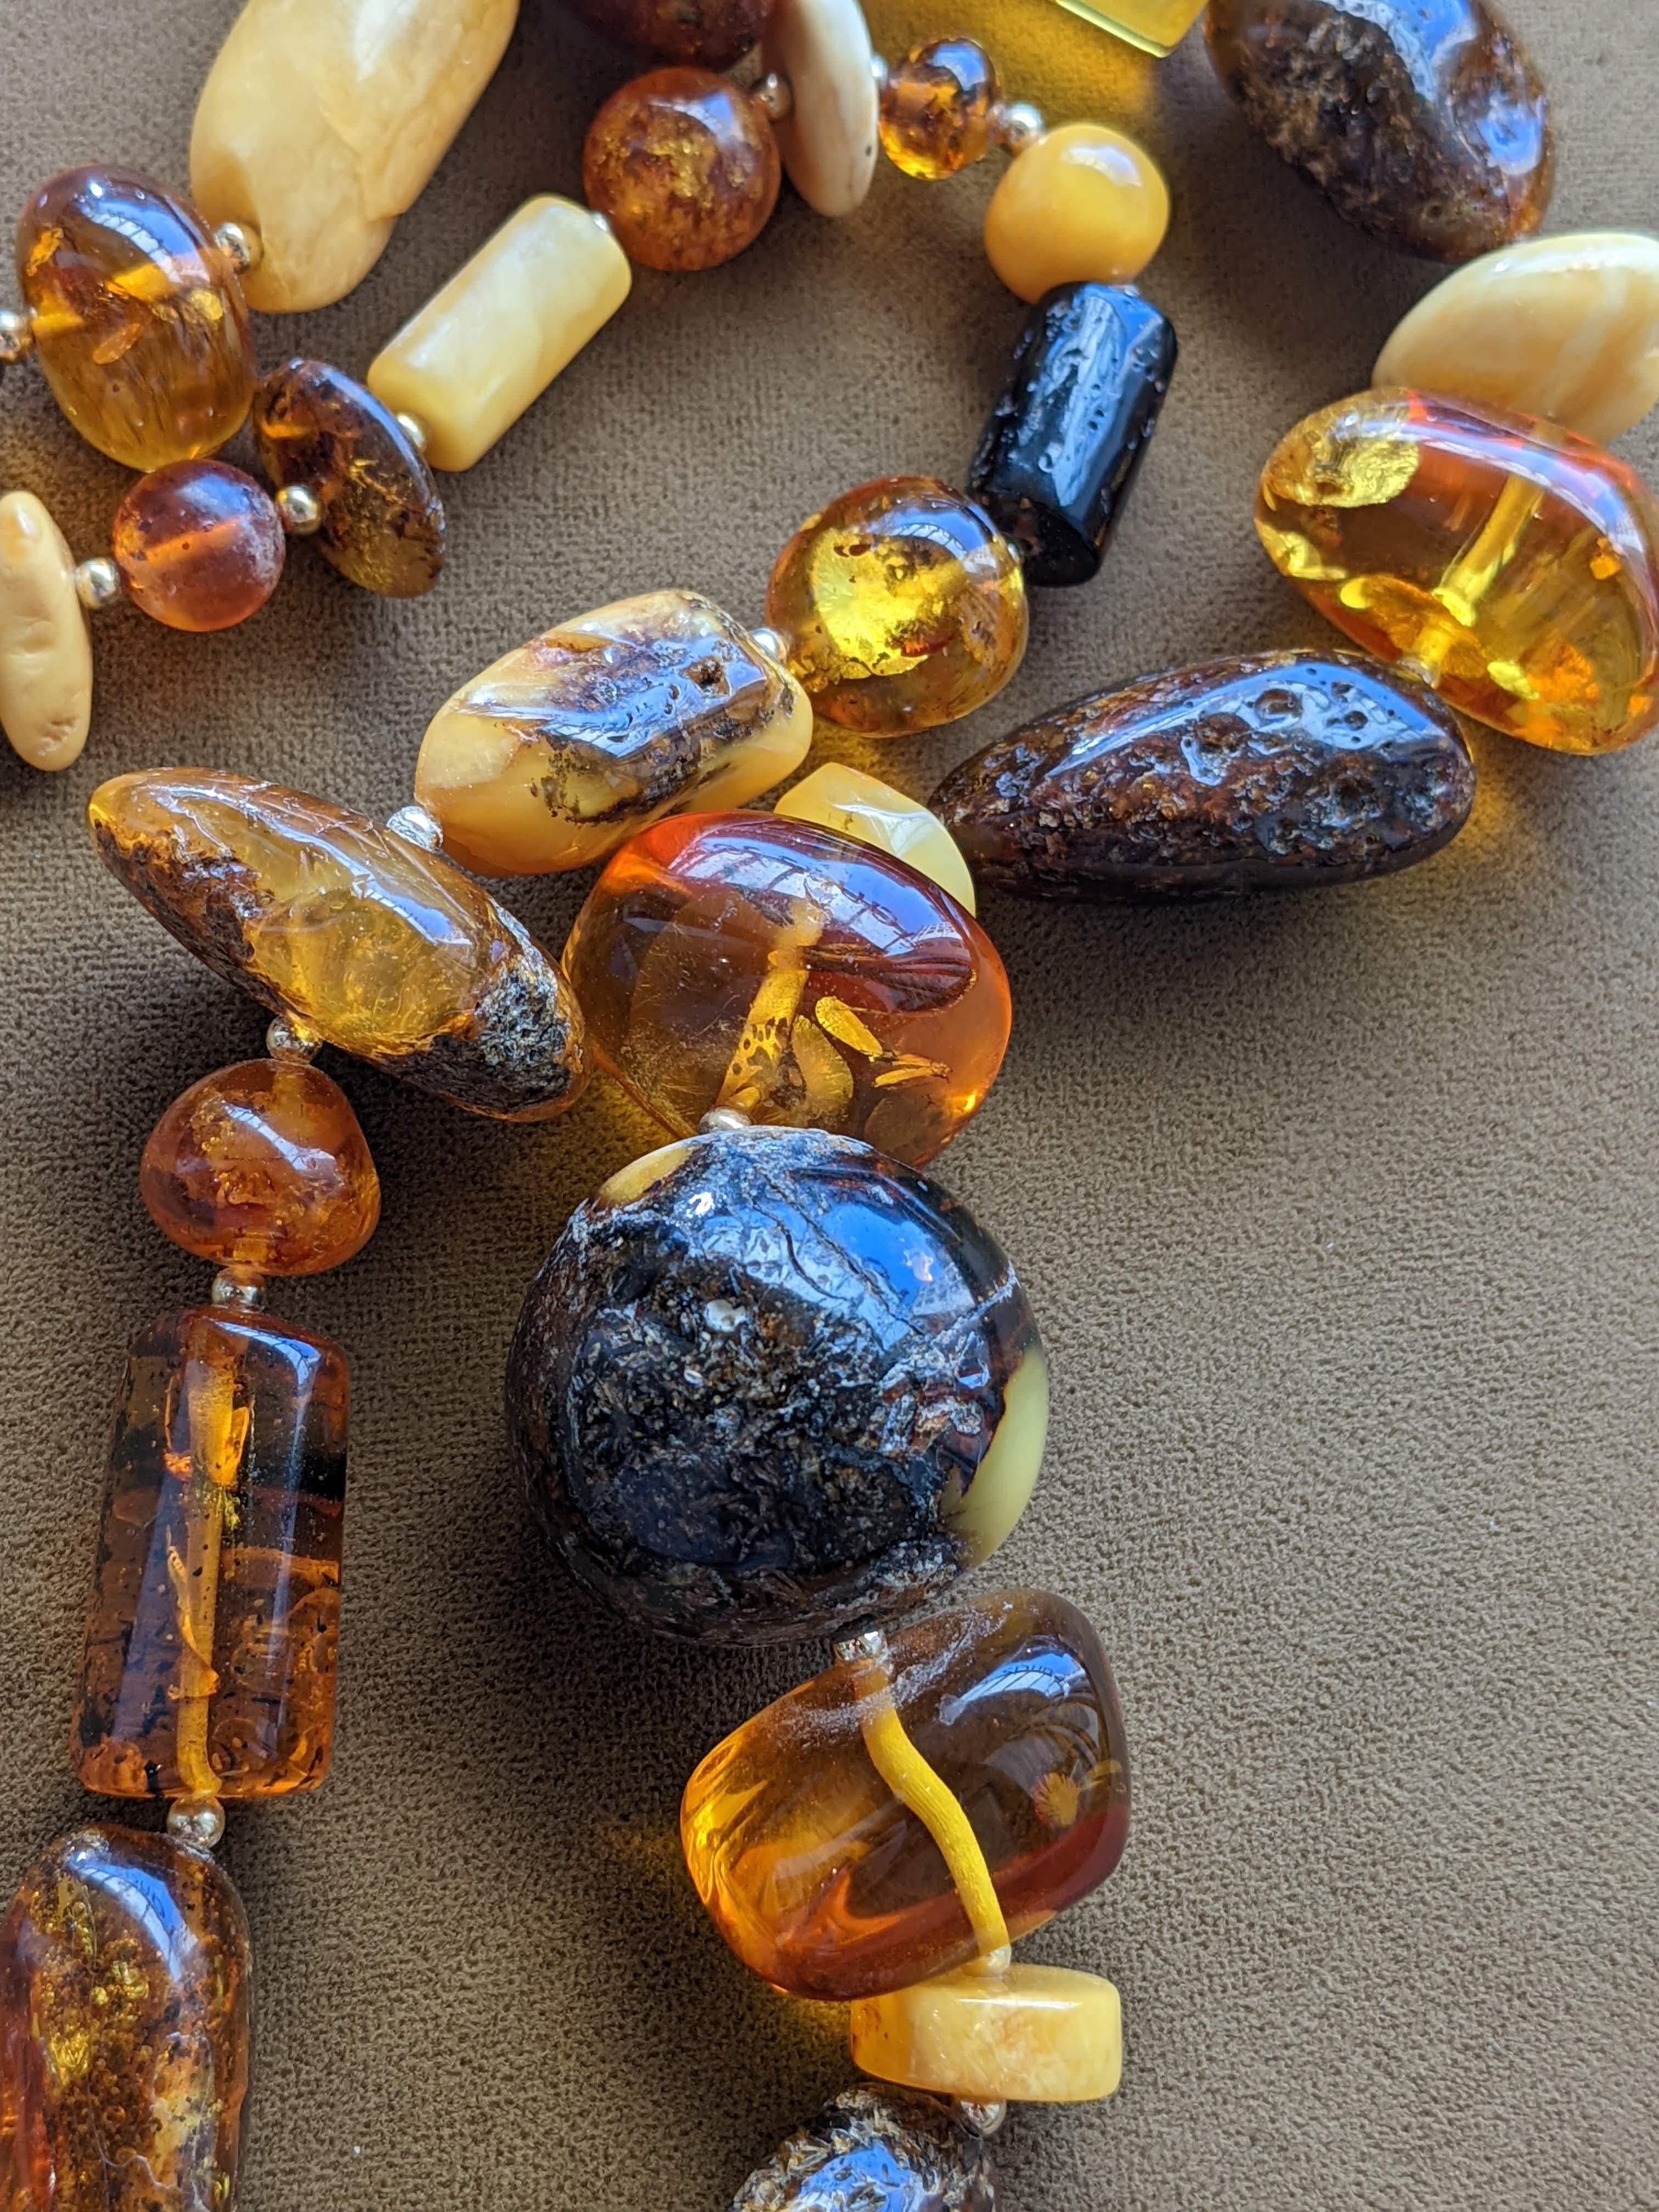 This fun and cheery necklace features a huge assortment of all natural Baltic Amber beads, all strung with small golden beads between so each is set off perfectly. There is a great mix of polished geometric shaped beads, and also lots of organically